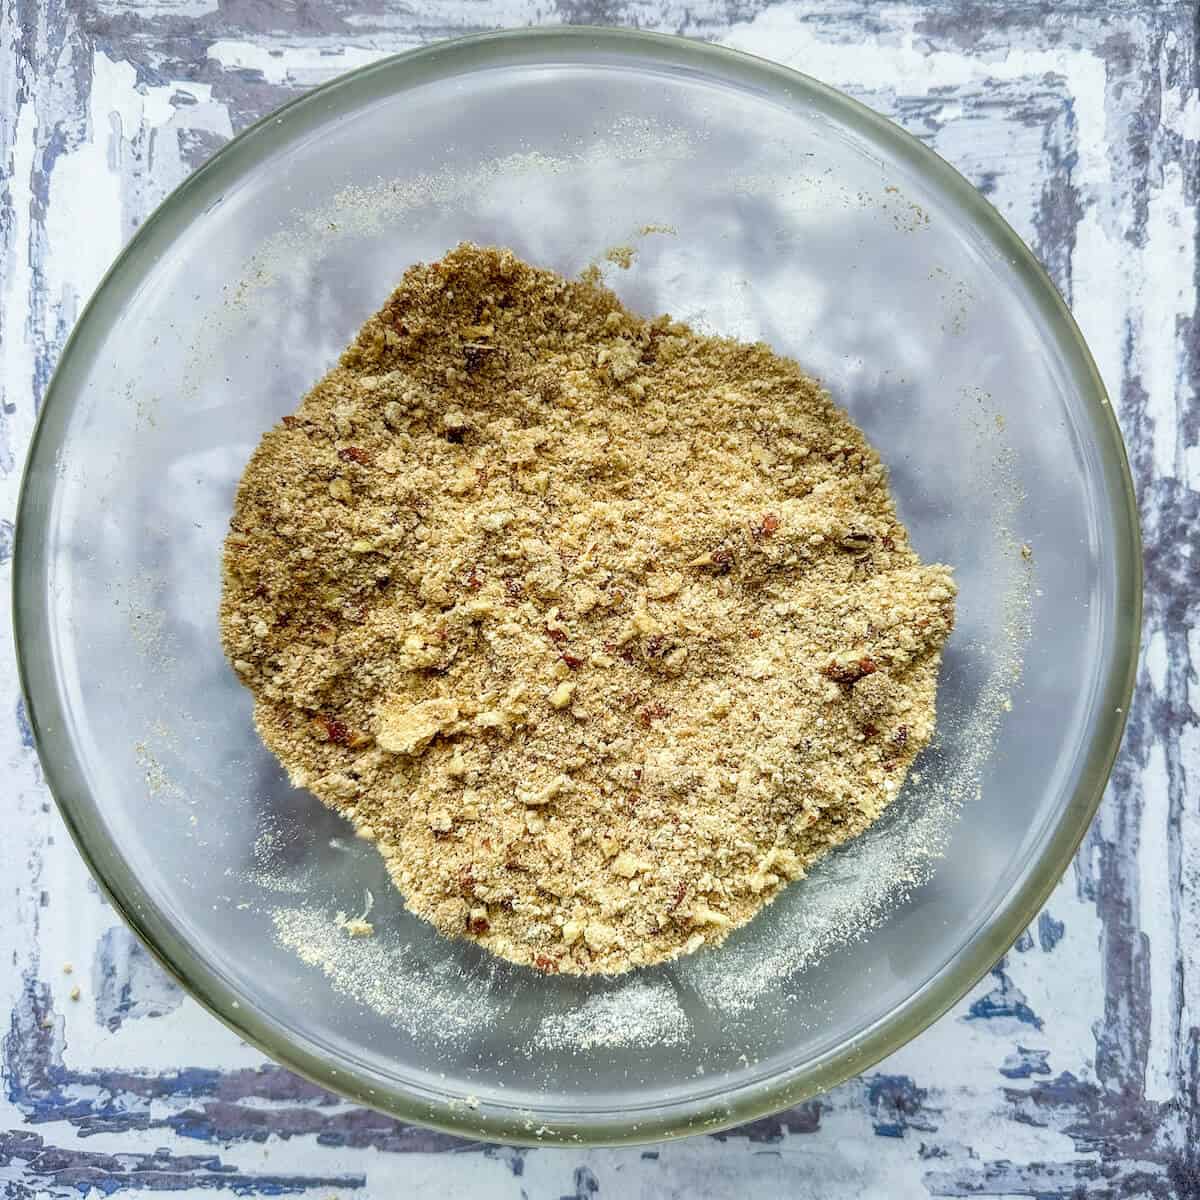 Crumble topping made from flour, butter, pecans, salt and baking powder in a mixing bowl. 